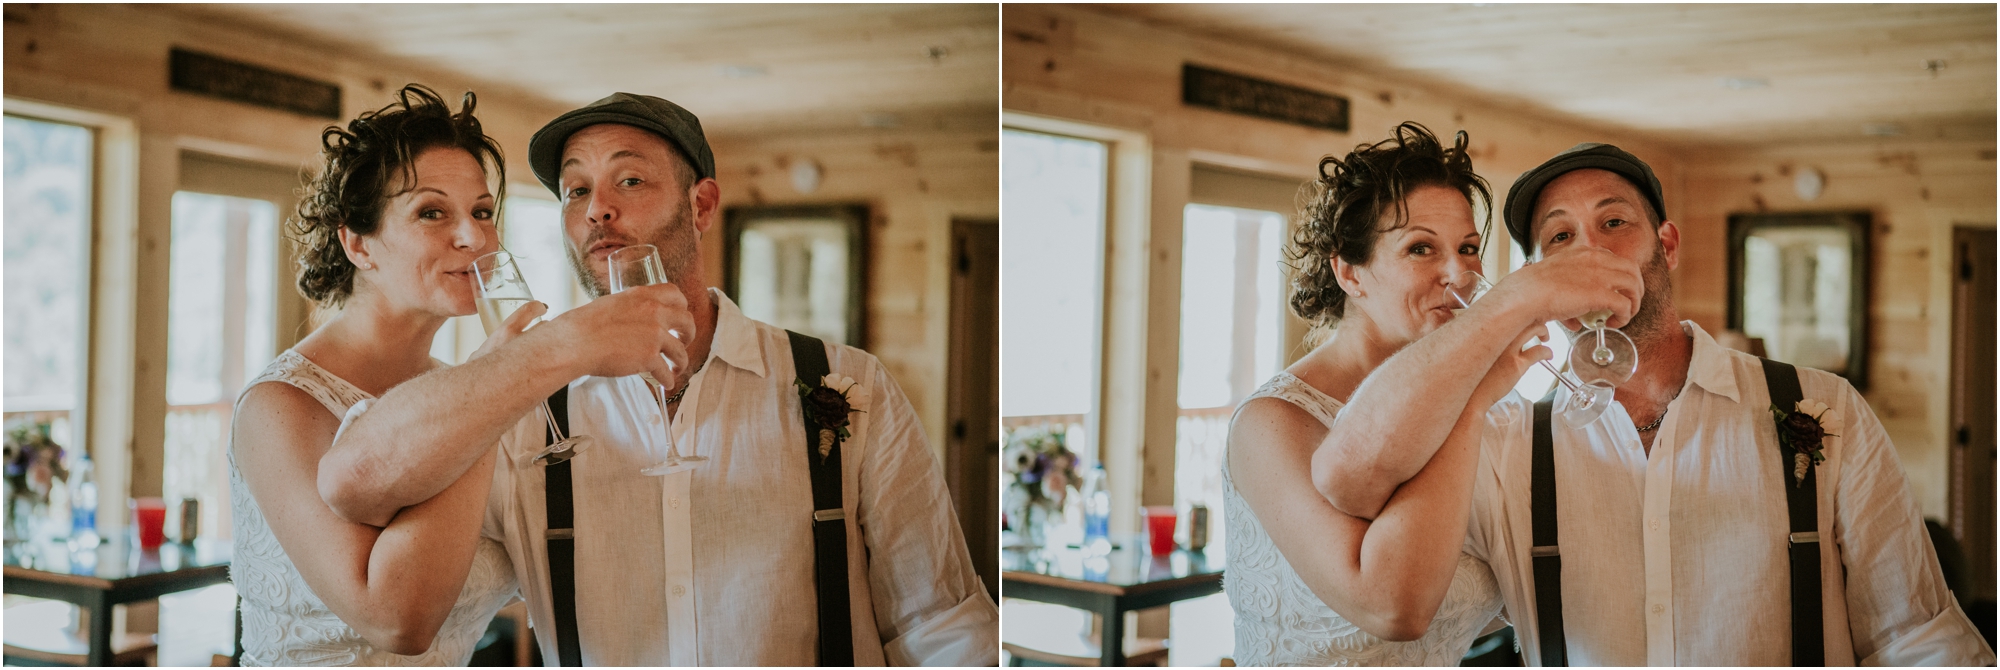 cabin-parkside-resort-the-magnolia-venue-tennessee-mountain-views-intimate-wedding_0162.jpg